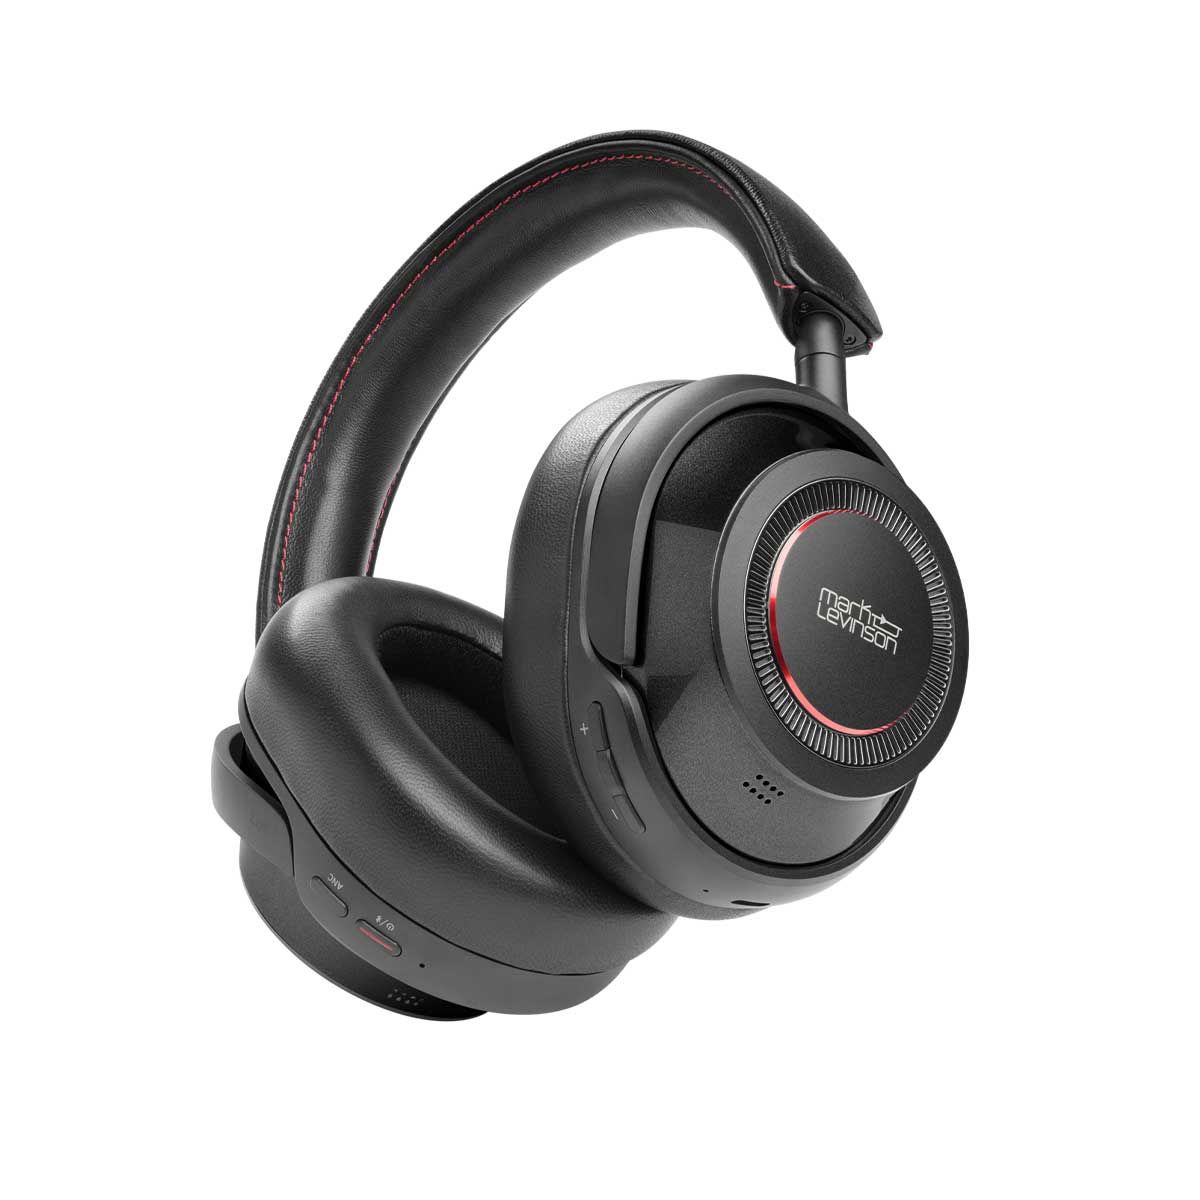 Close-up angled view of the Mark Levinson № 5909 Premium Hi-Res Wireless ANC Over-Ear headphones in the Black Pearl finish.